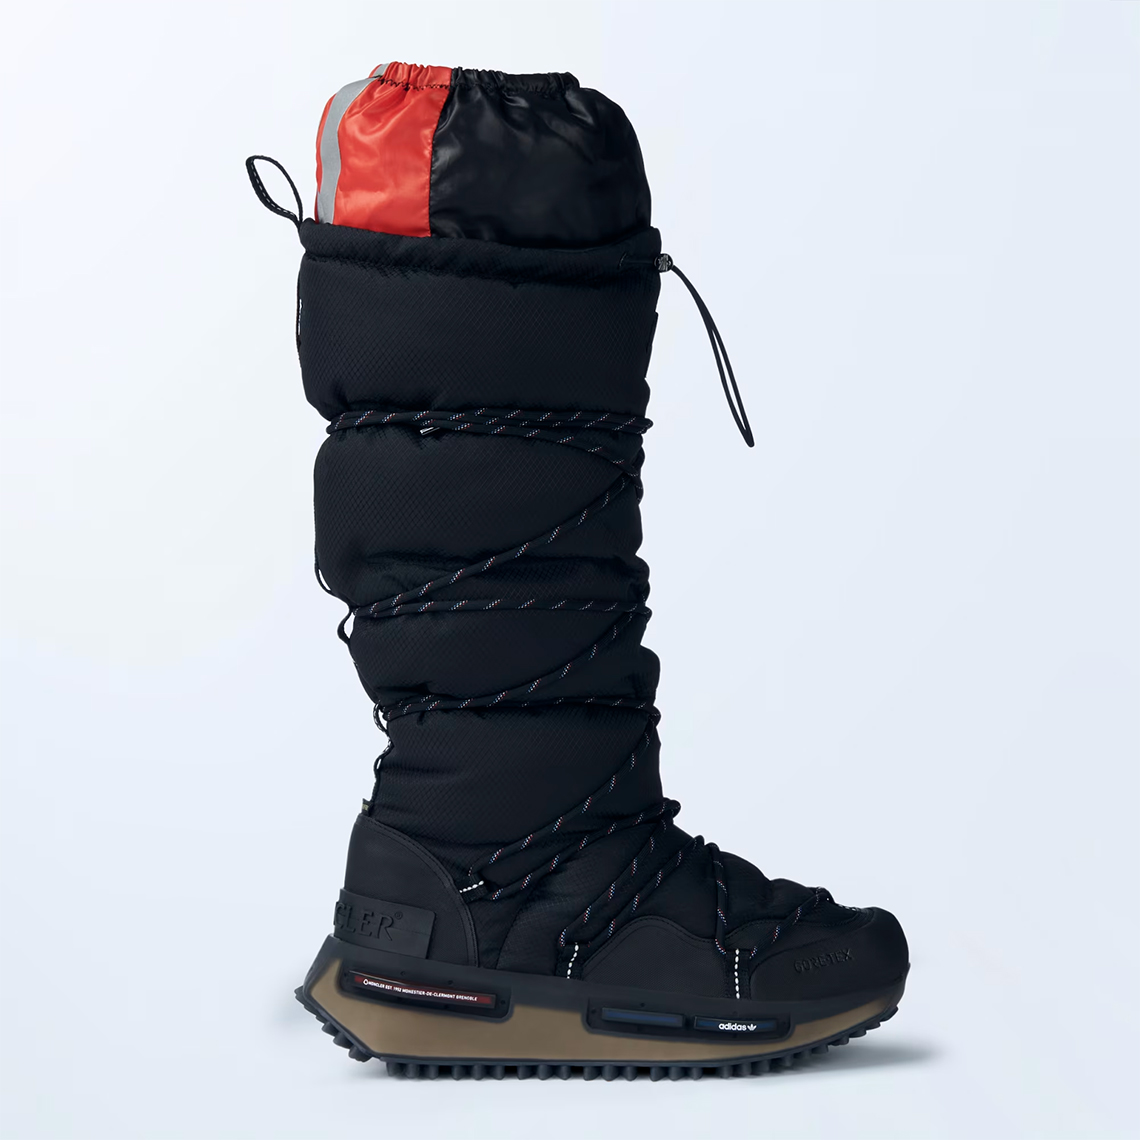 The Moncler x adidas Collection Releases October 4 - Sneaker News